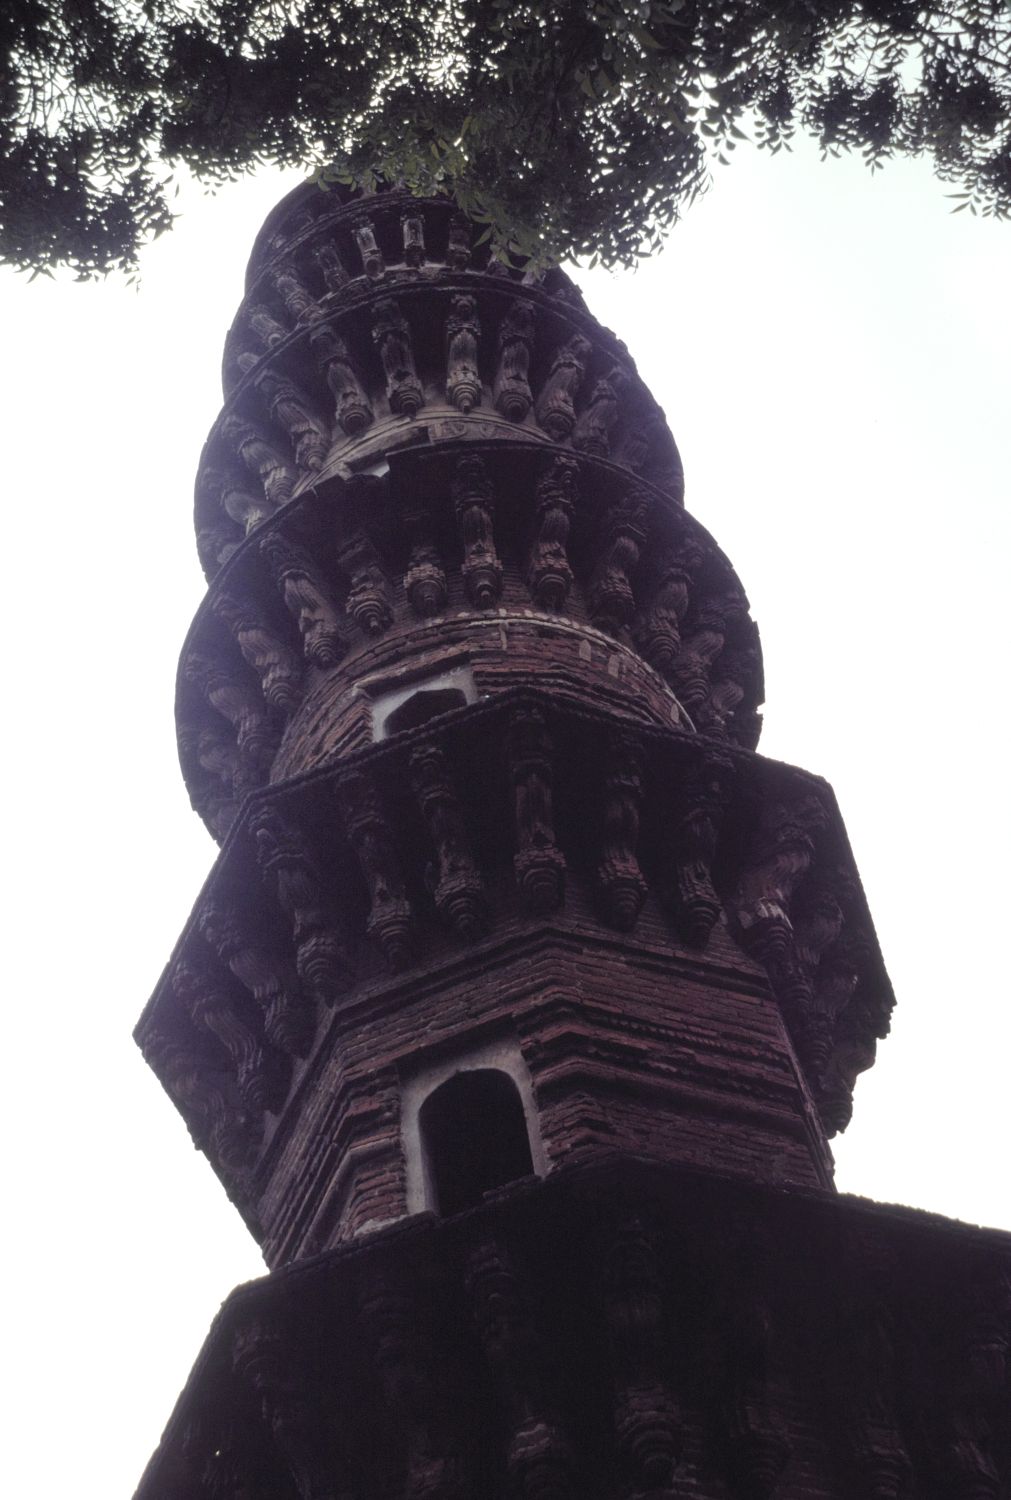 View of upper portion of one of the minarets, showing balconies.